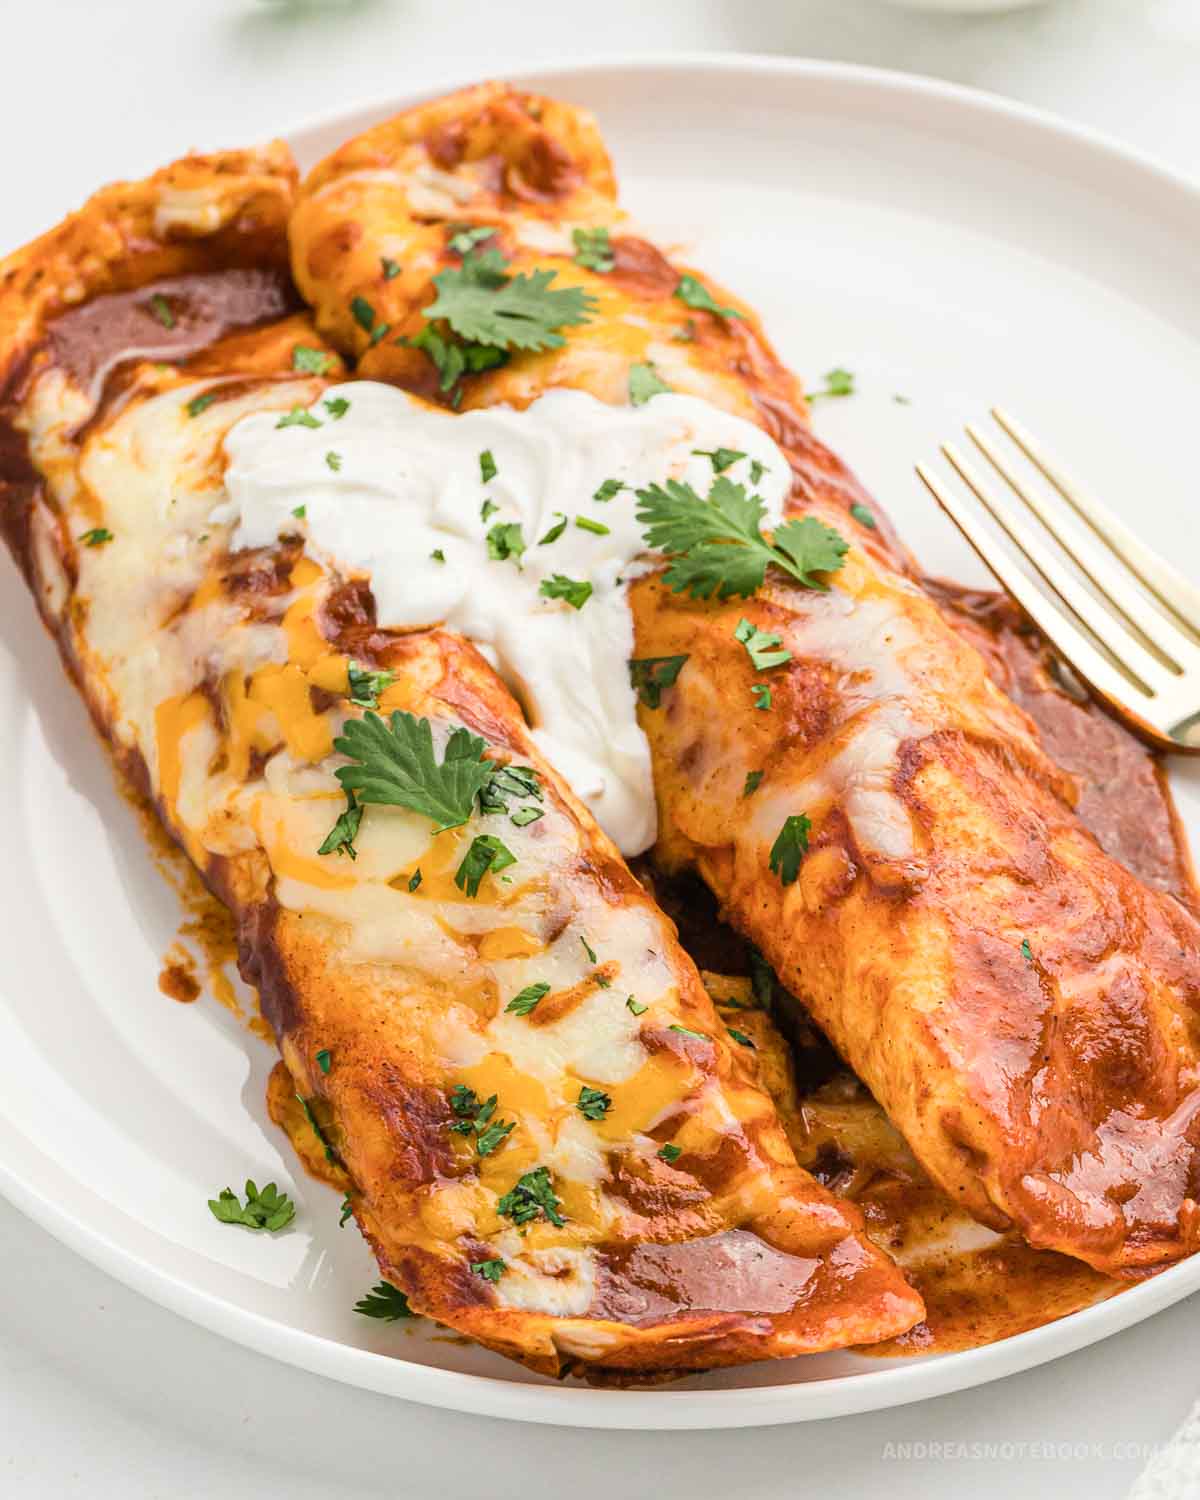 Two chicken enchiladas rancheras on a plate with a dollop of sour cream and cilantro on top.